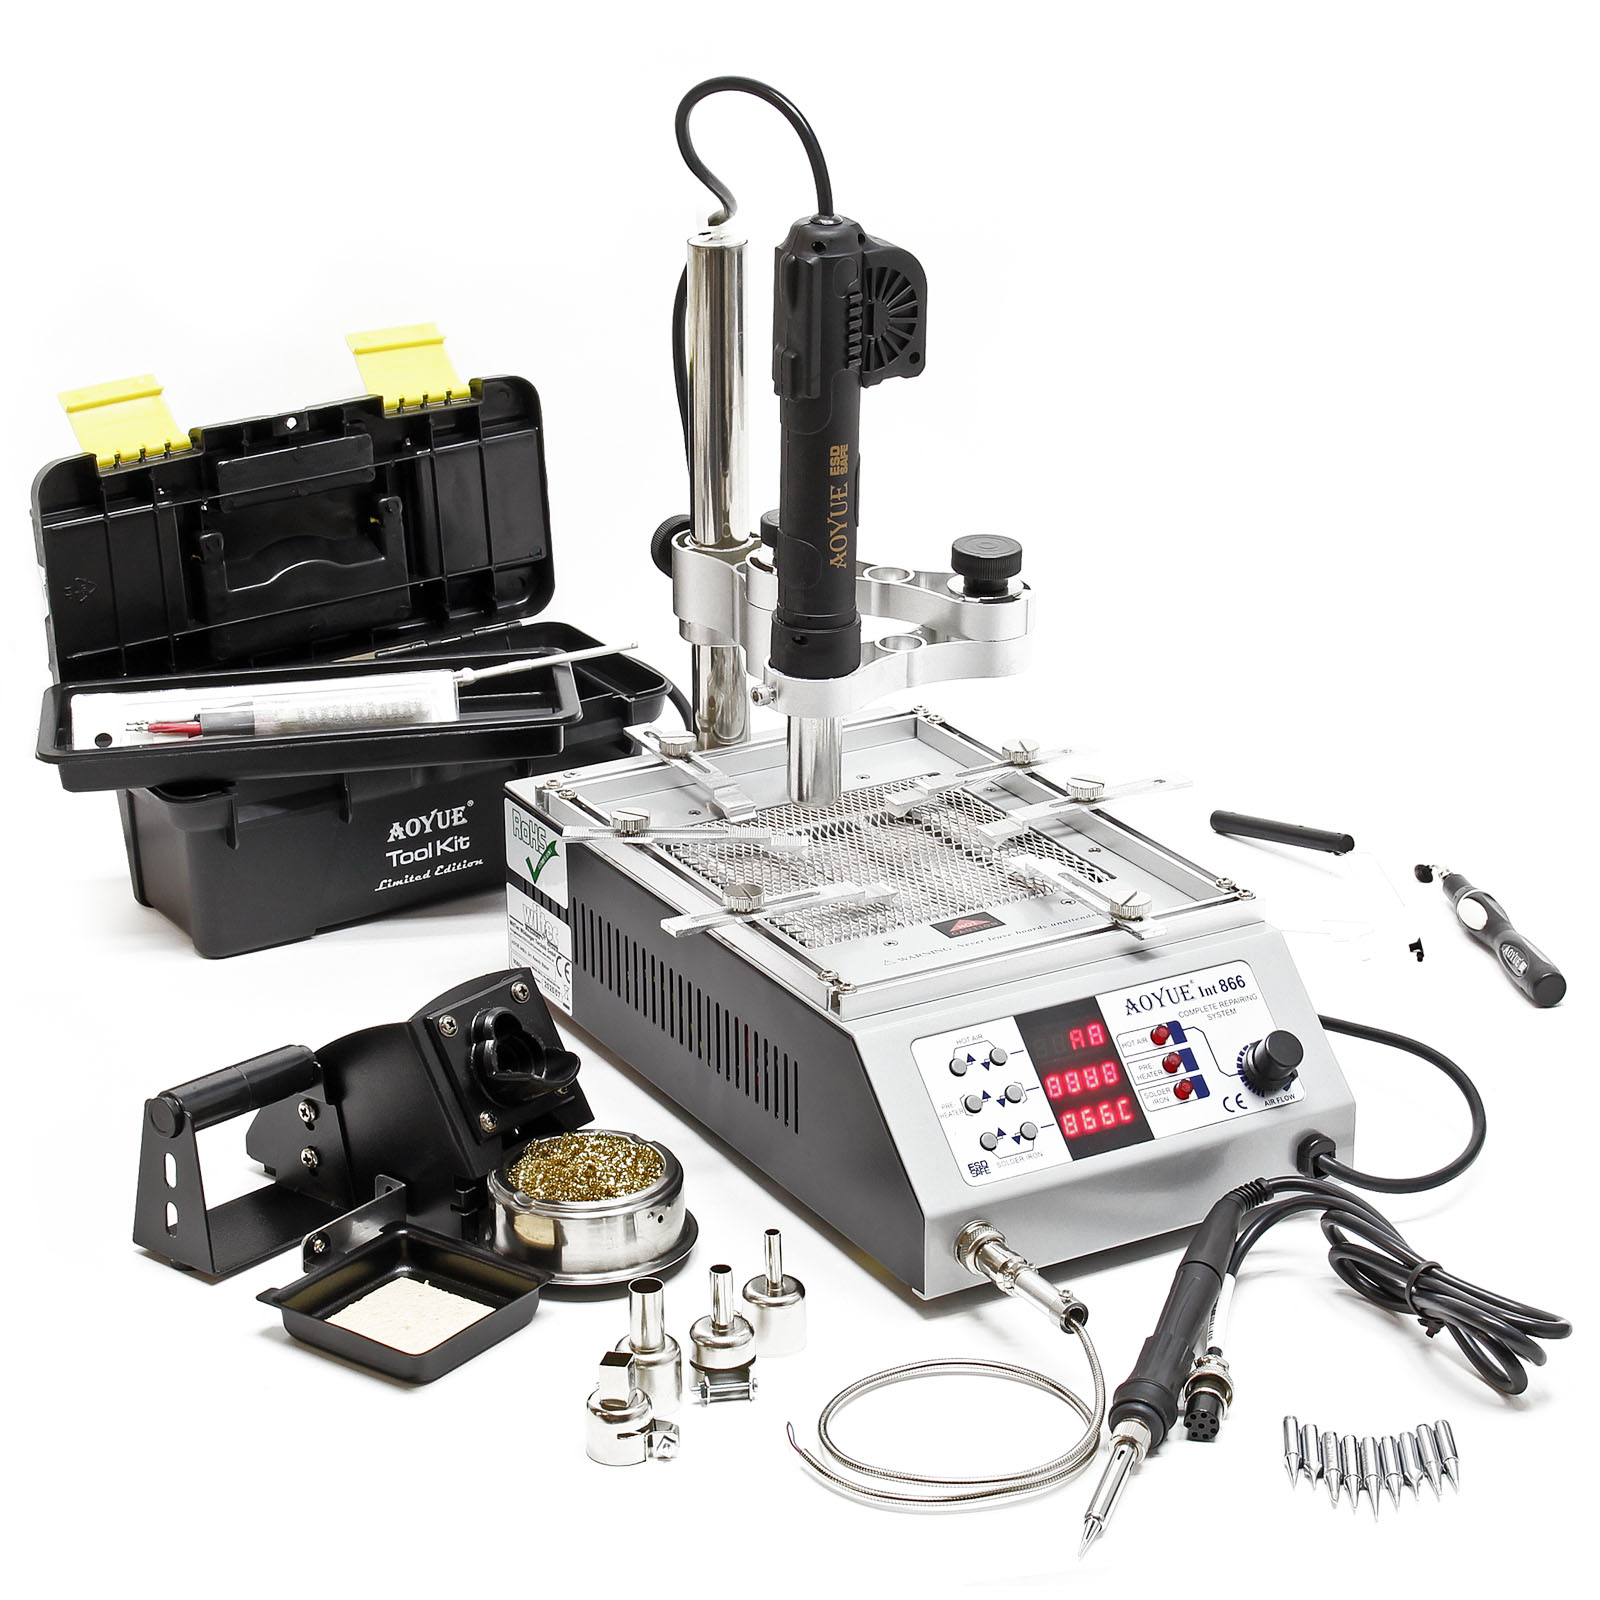 AOYUE Int866 3in1 Rework Station lead free Hot Air Soldering Station